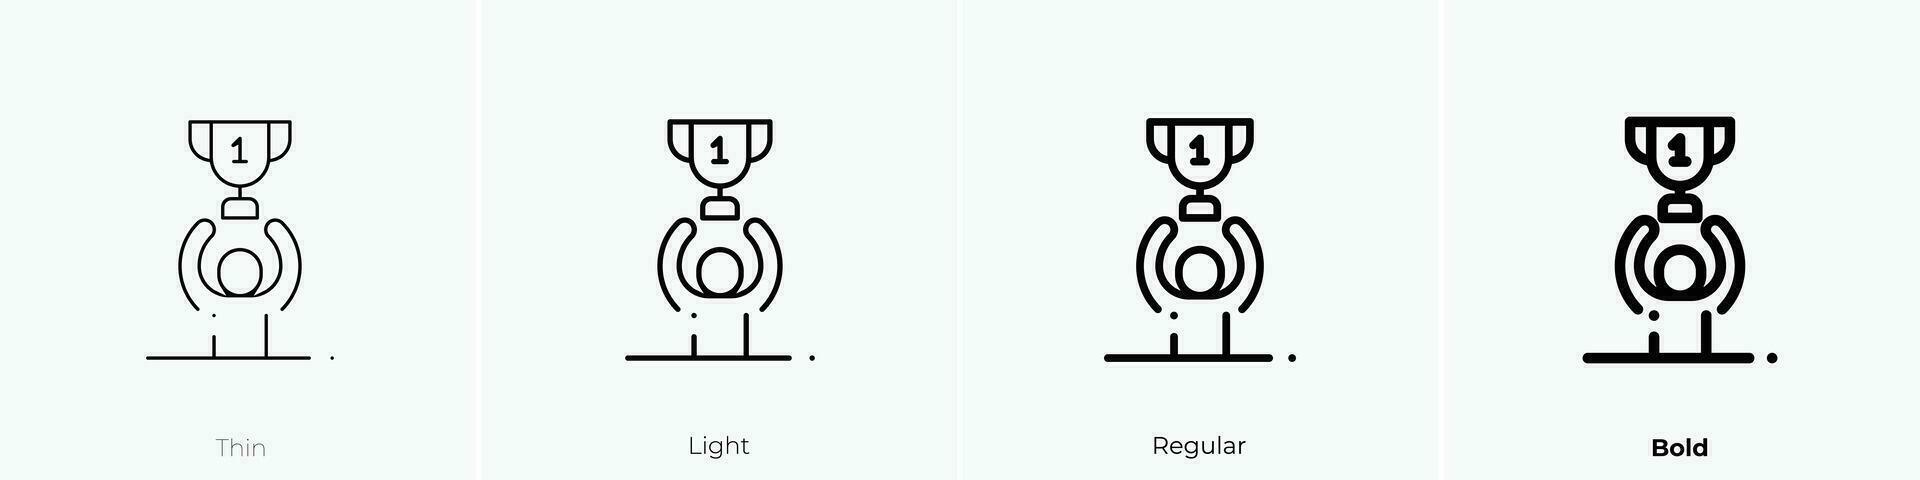 winner icon. Thin, Light, Regular And Bold style design isolated on white background vector